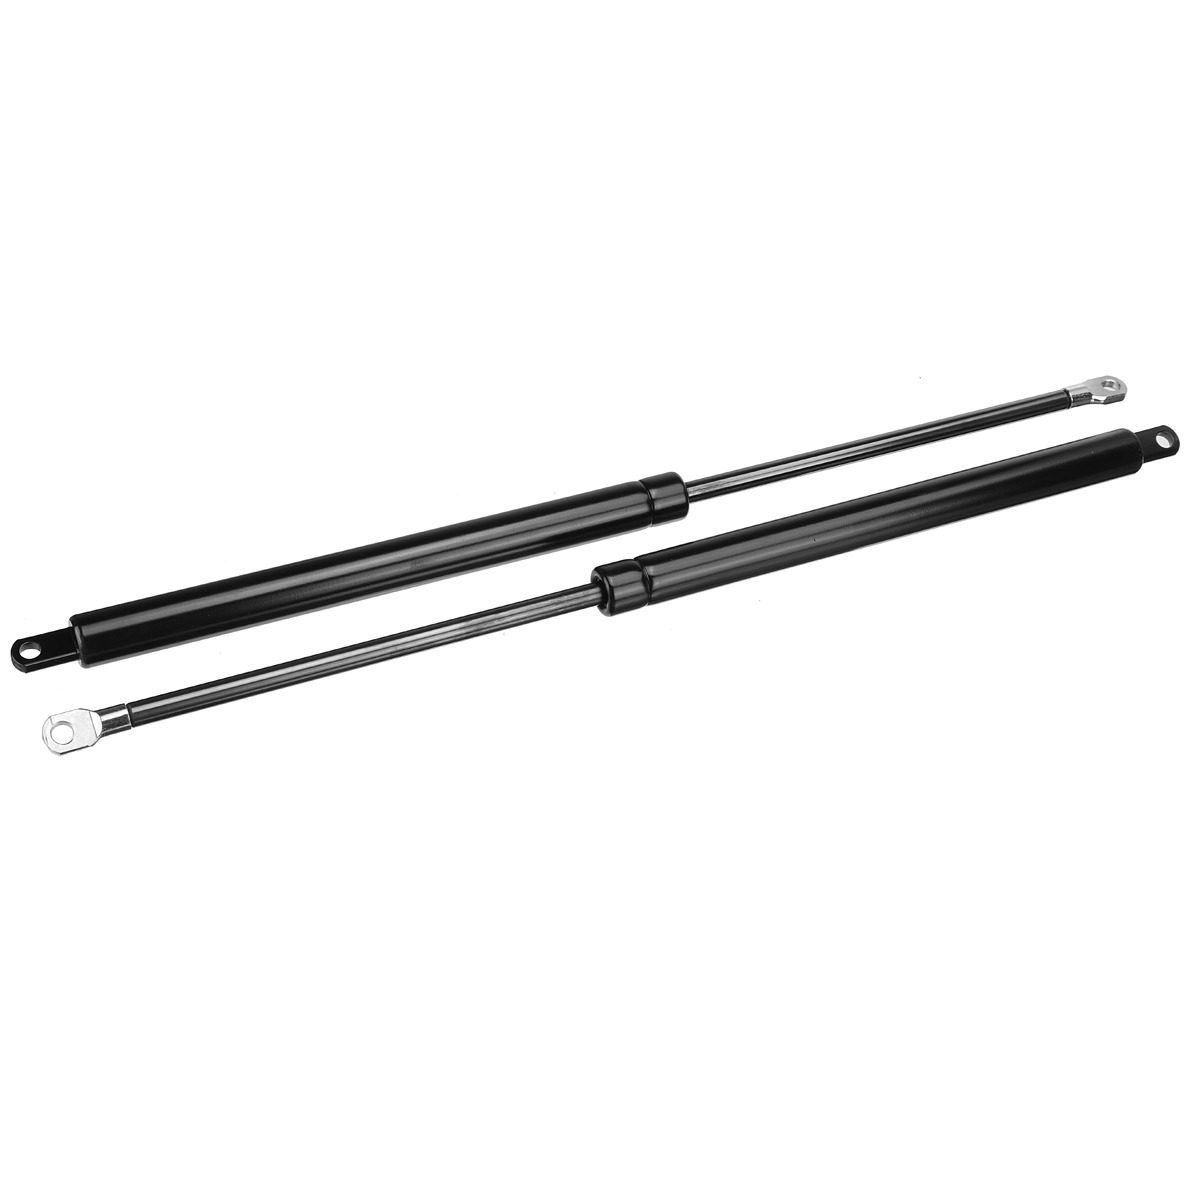 2Pcs-310-810mm-Extended-100-350-Compressed-Universal-800N-Force-Gas-Springs-Struts-Lifters-Supports--1777718-8